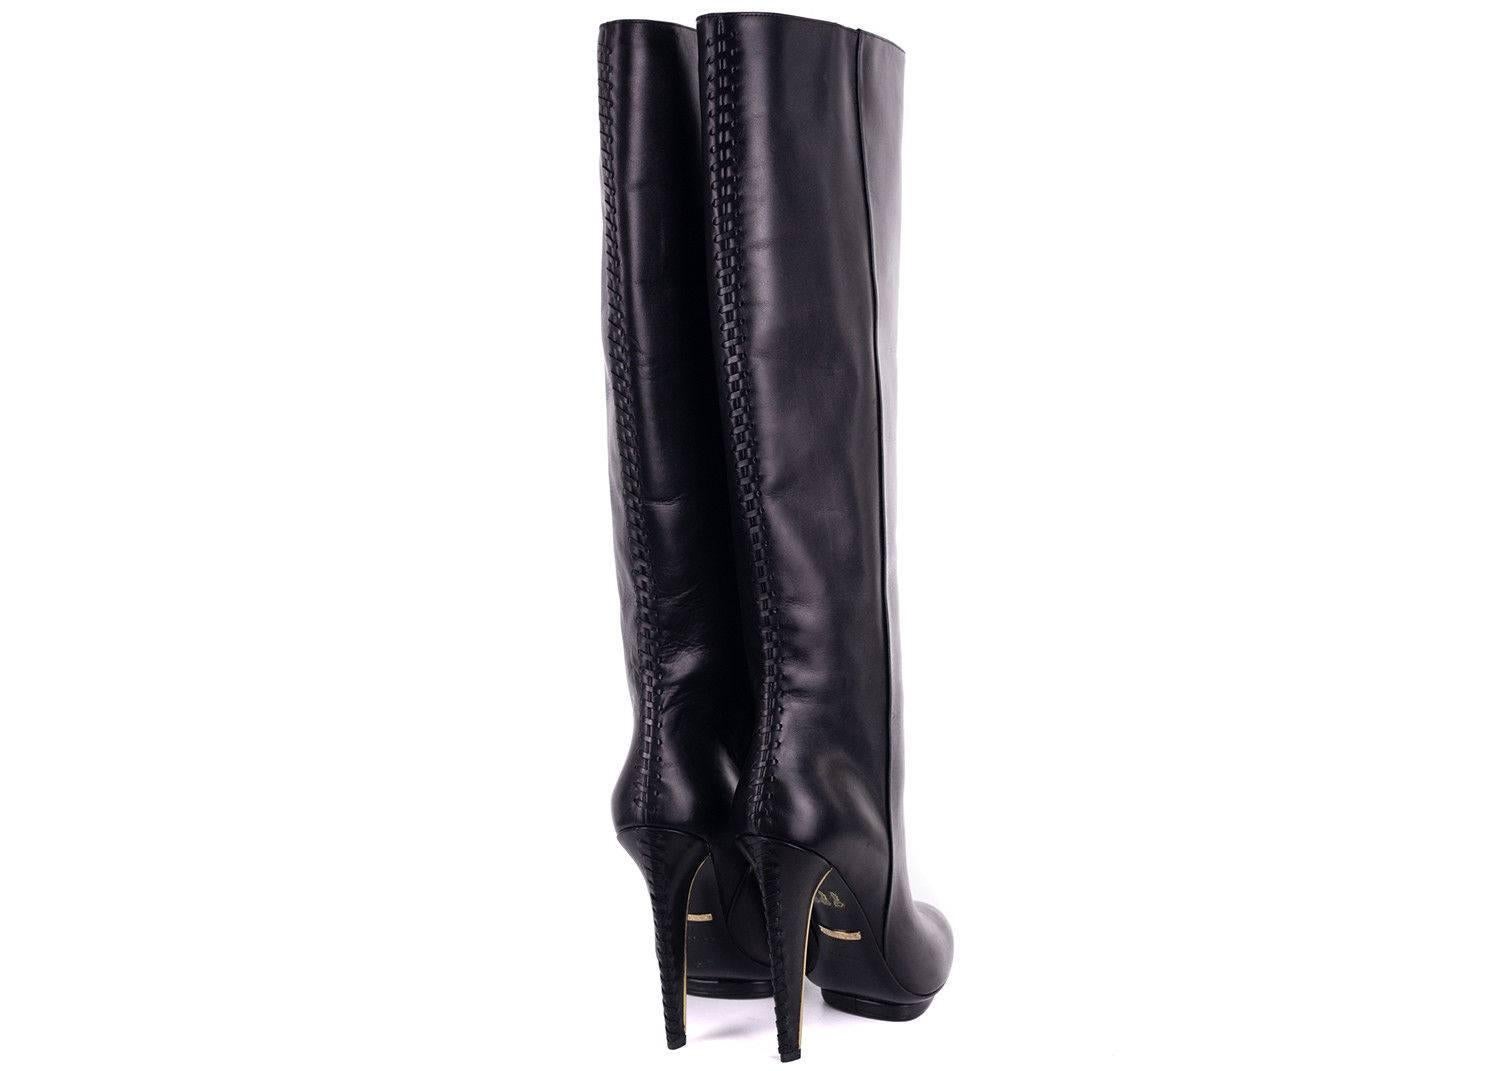 Brand New Roberto Cavalli Knee High Boots
Original Box not Included with purchase

Retails in Stores and online for $1320

Size IT 38.5 / US 8.5 Fits True to Size

Roberto Cavalli's black leather over the knee boots featuring a woven detailing from